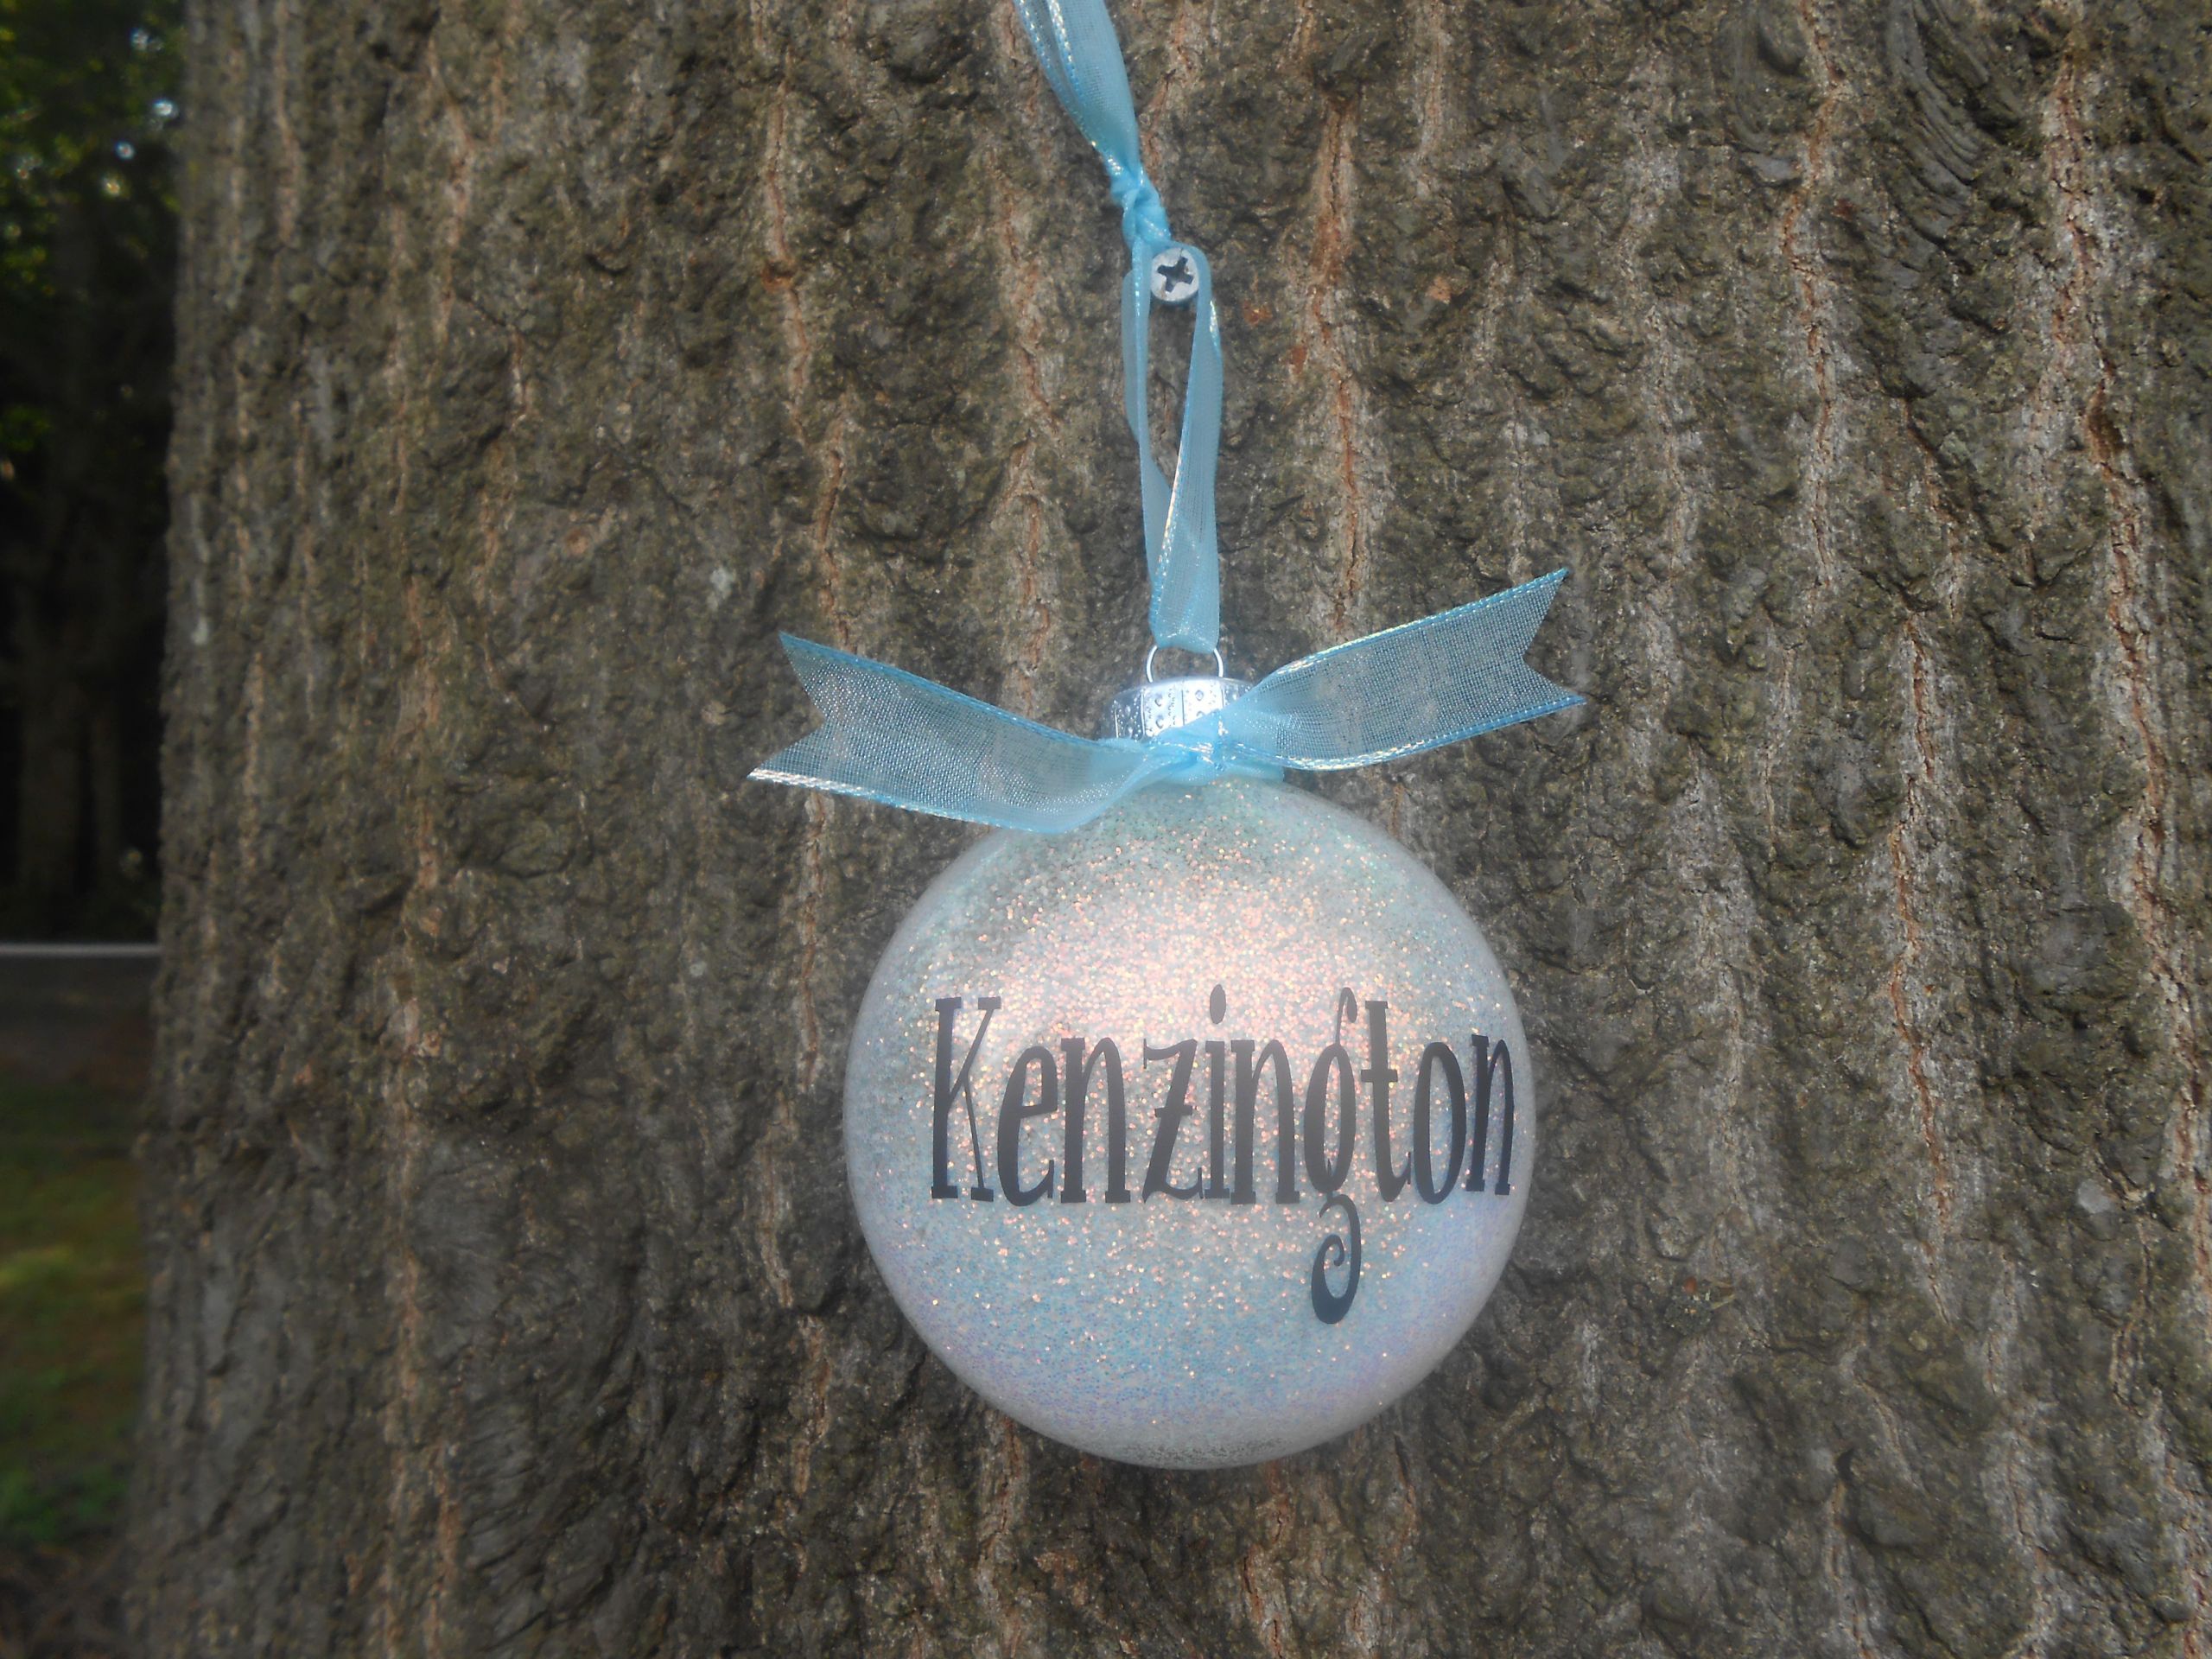 DIY Glitter Ornaments With Hairspray
 hairspray and glitter ornament personalized with my